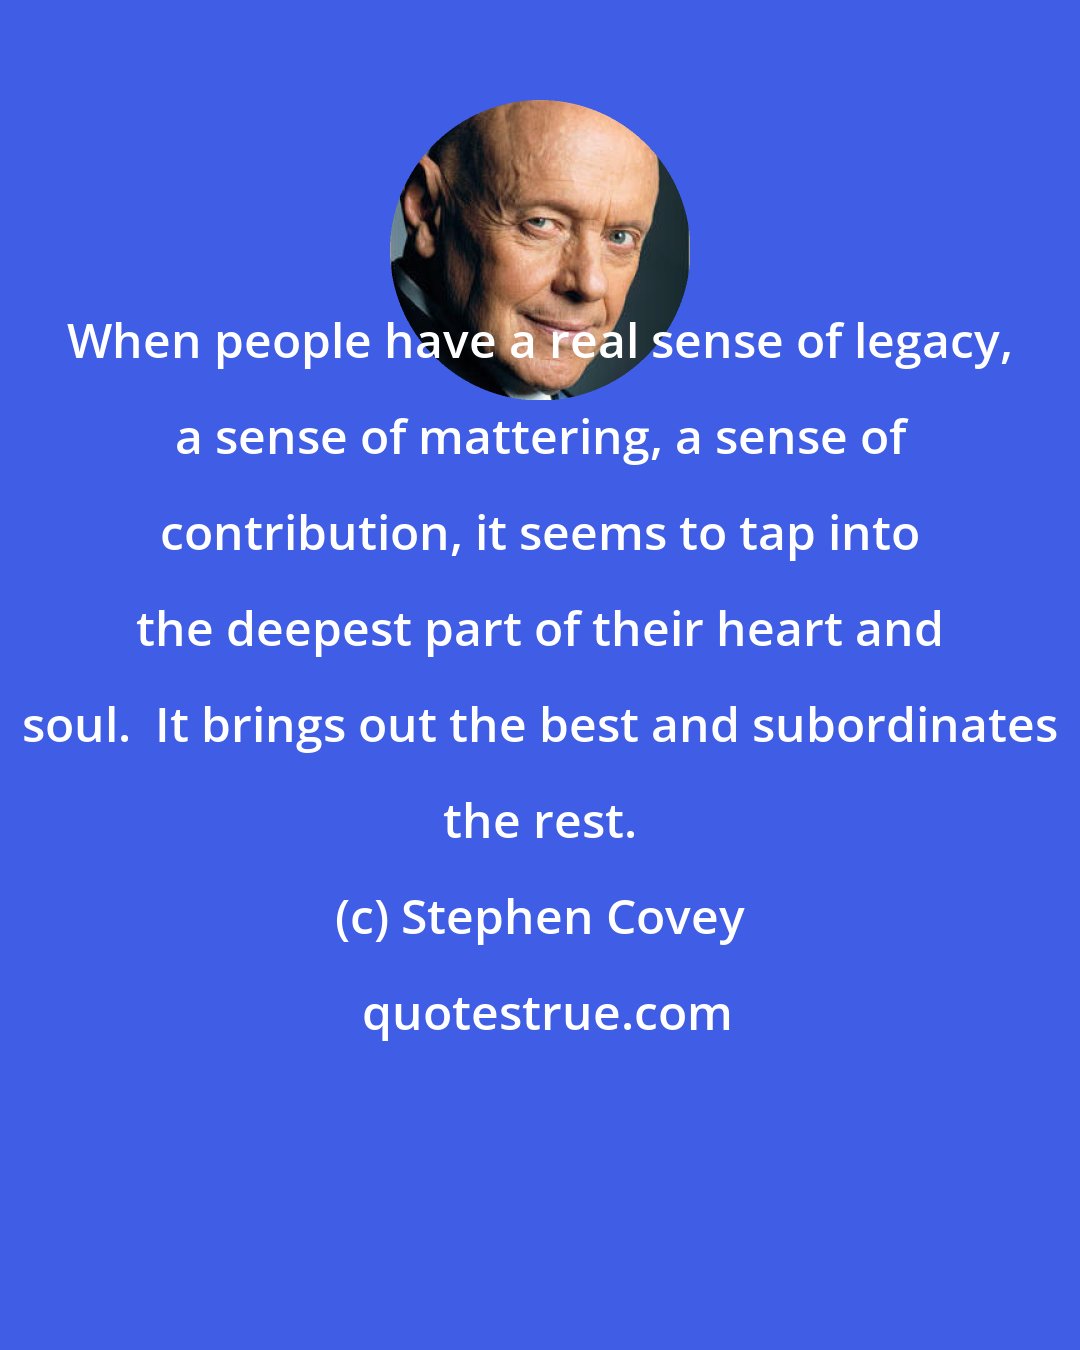 Stephen Covey: When people have a real sense of legacy, a sense of mattering, a sense of contribution, it seems to tap into the deepest part of their heart and soul.  It brings out the best and subordinates the rest.